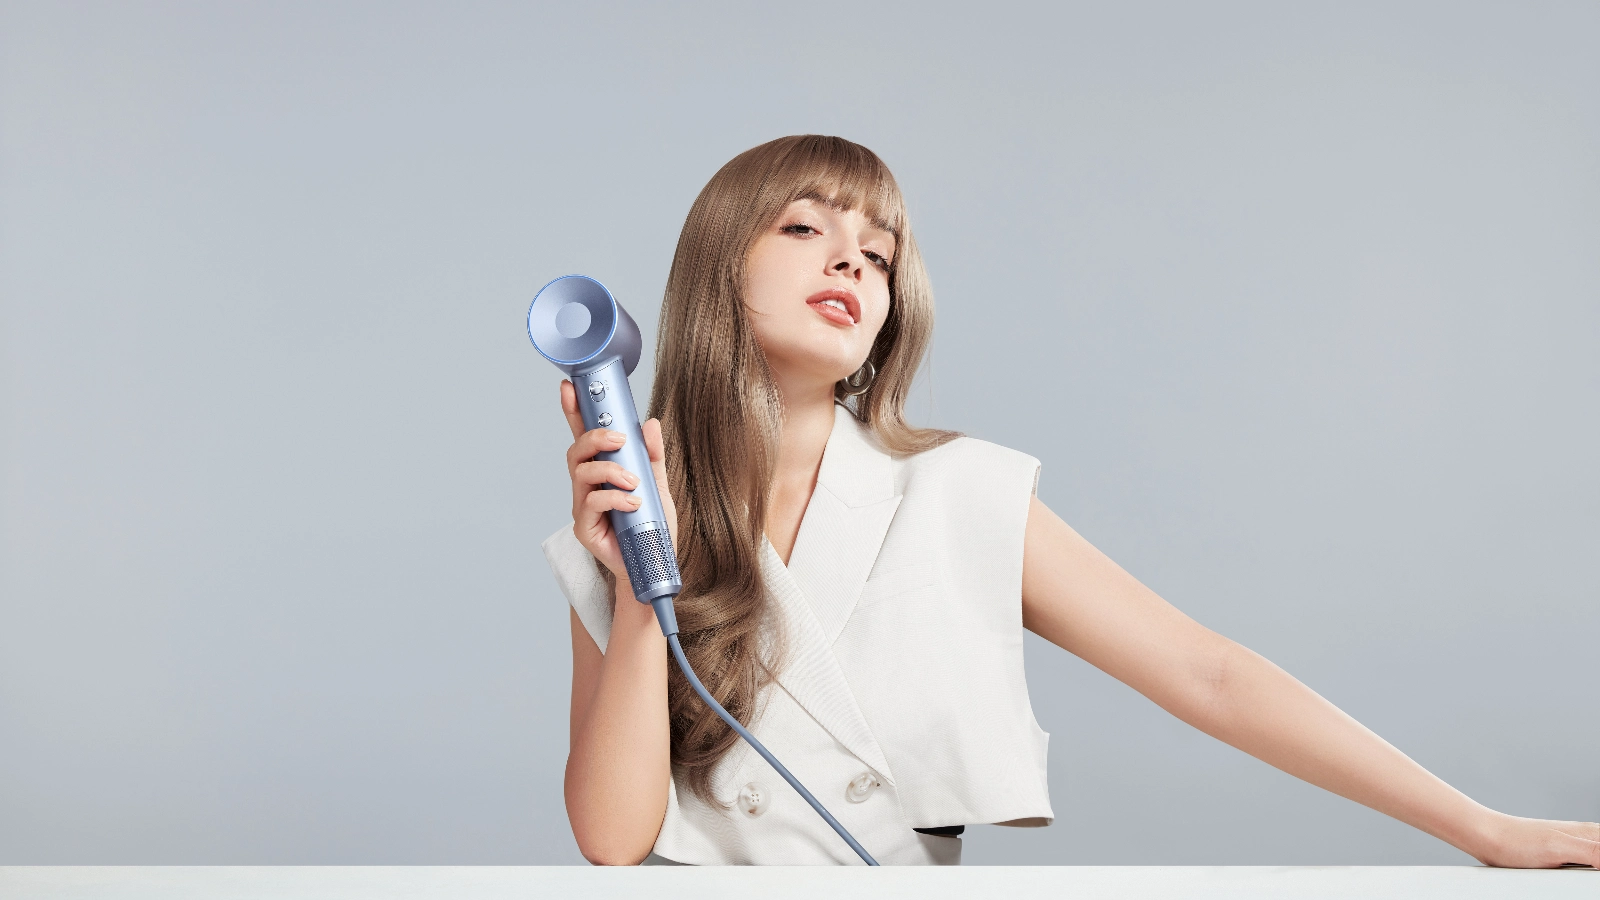 Try a good hair dryer for your short hair